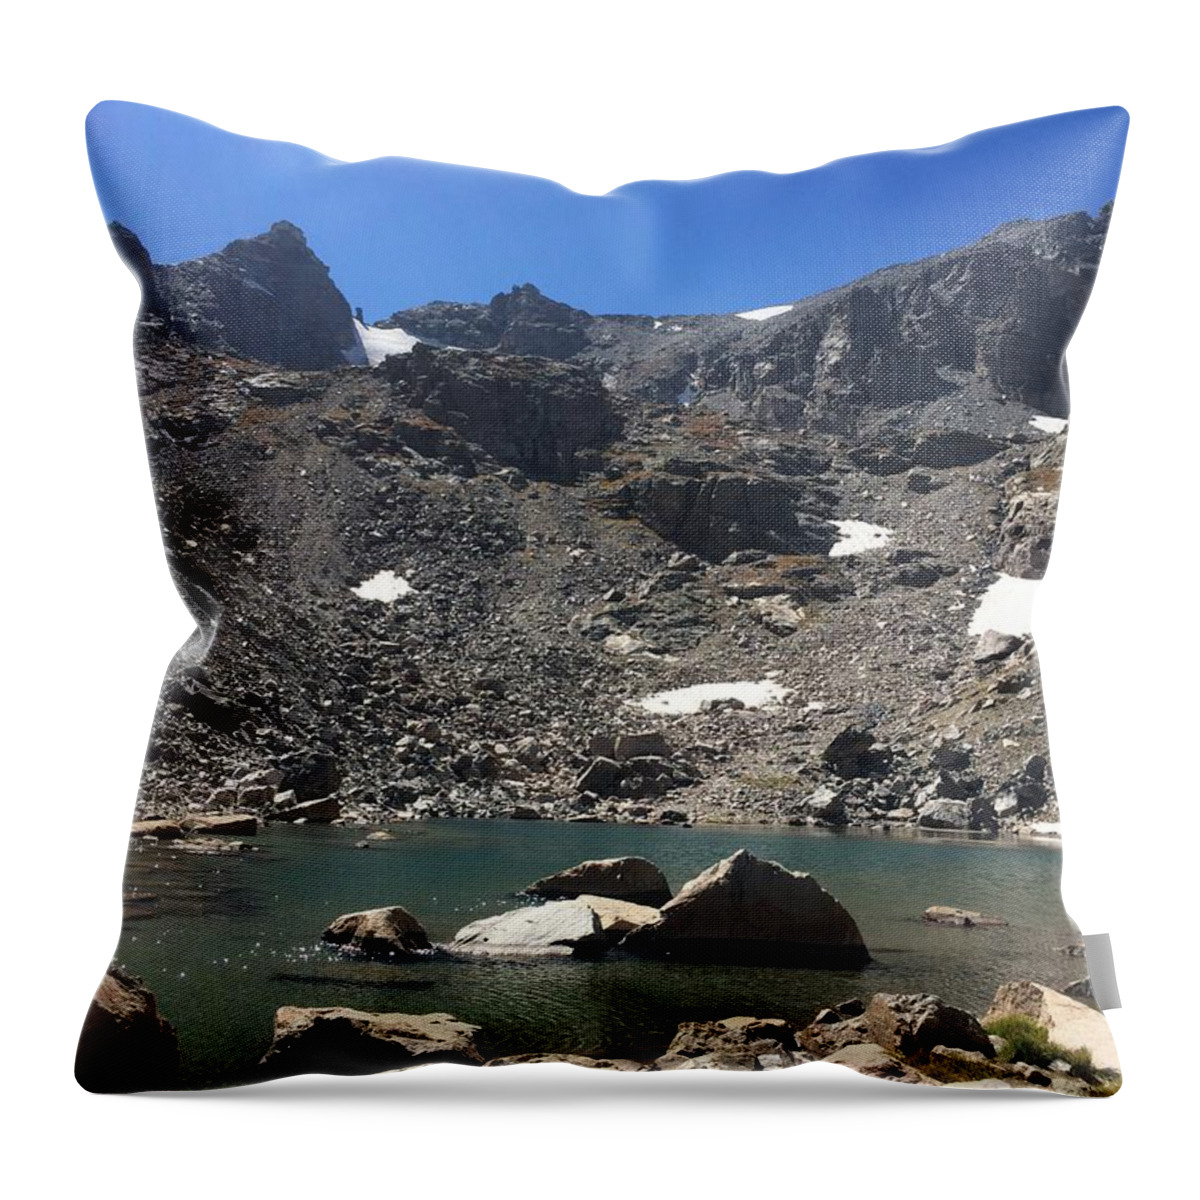 Lake Throw Pillow featuring the photograph Glacier Lake by Kristen Anna